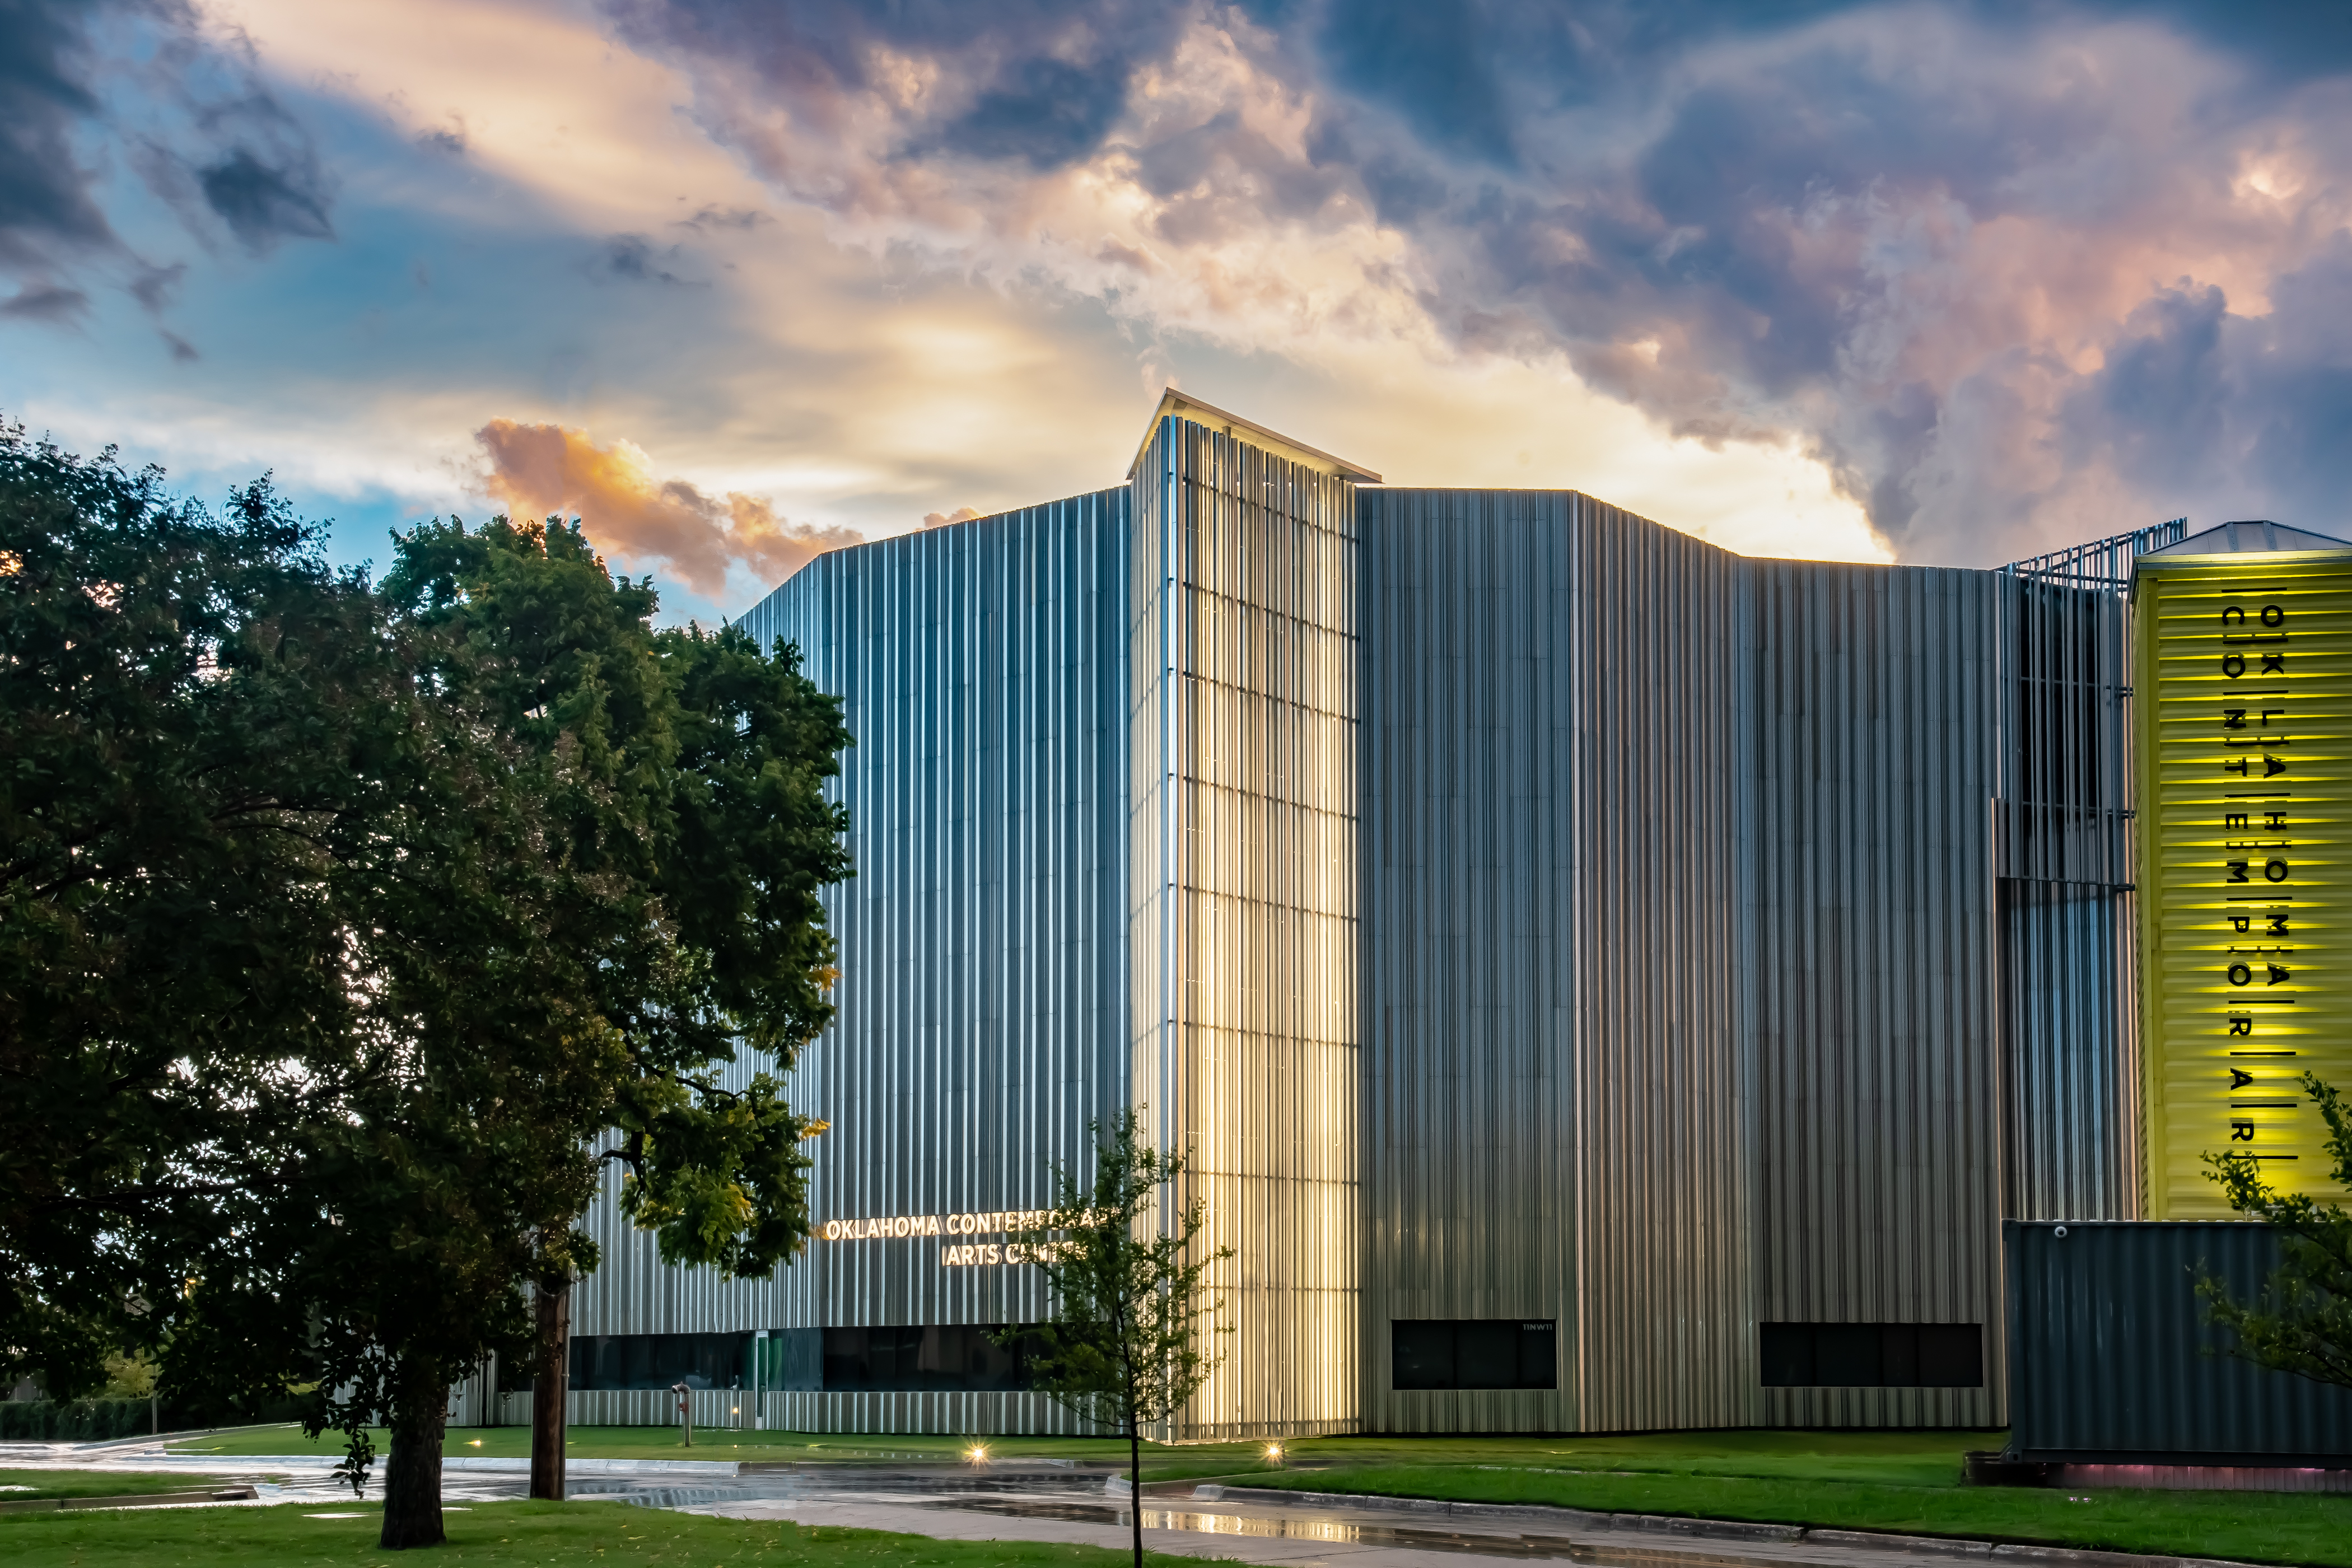 The sky is filled with blue and pink clouds, and the ground looks like there has been recent rain. We can see green grass and full trees in front of a large building covered in aluminum fins reflecting the sky's colors.